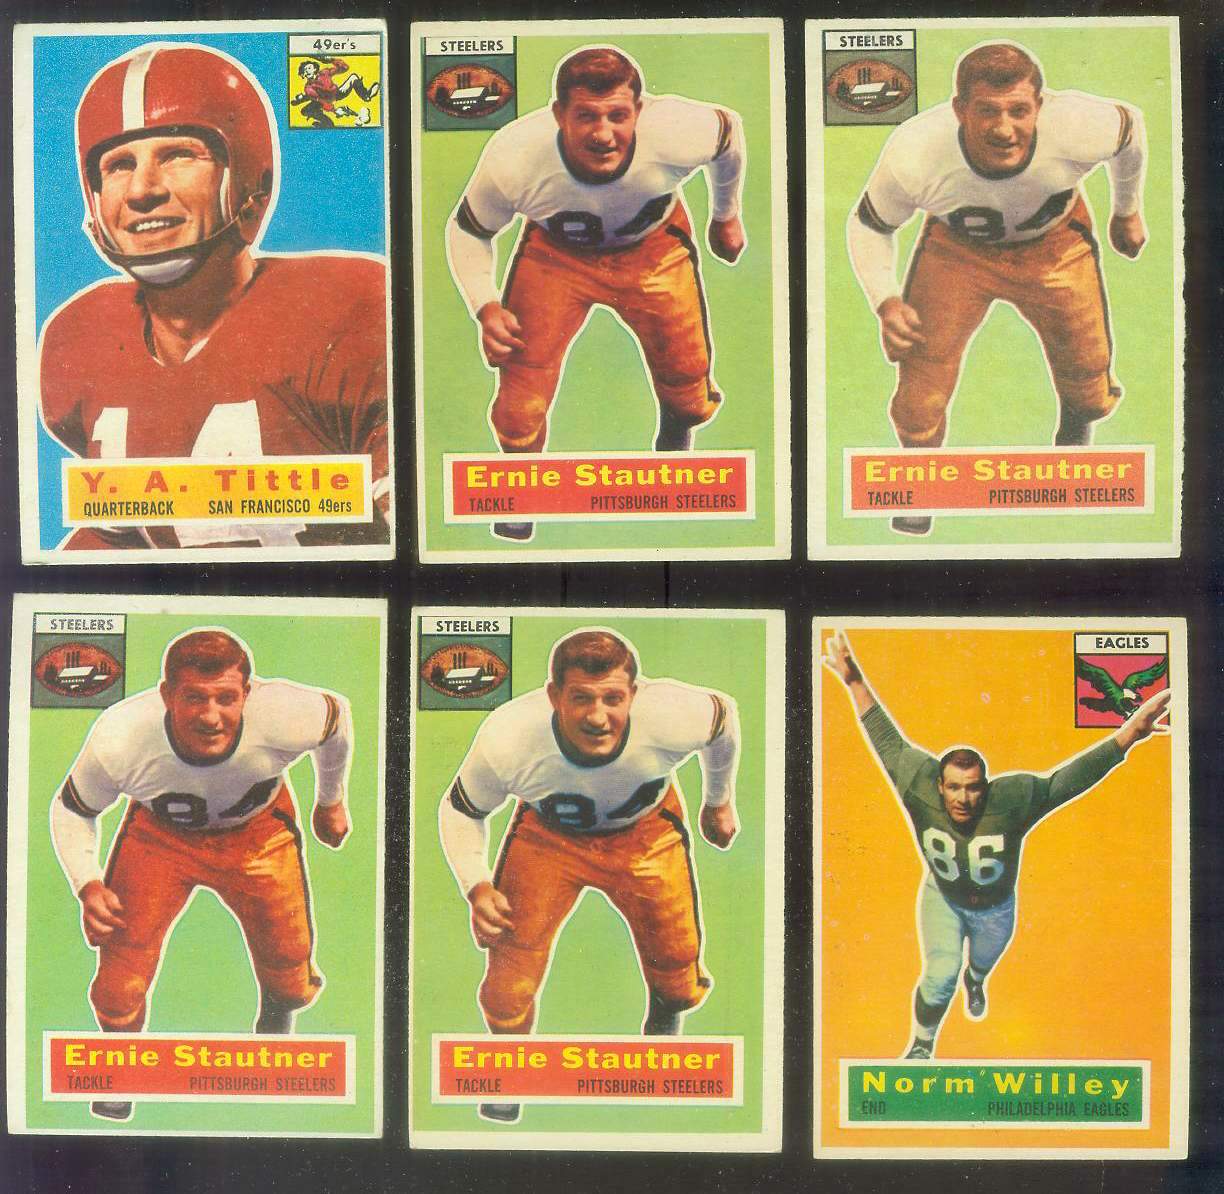 1956 Topps FB # 86 Y.A. Tittle [#] (49ers) Football cards value